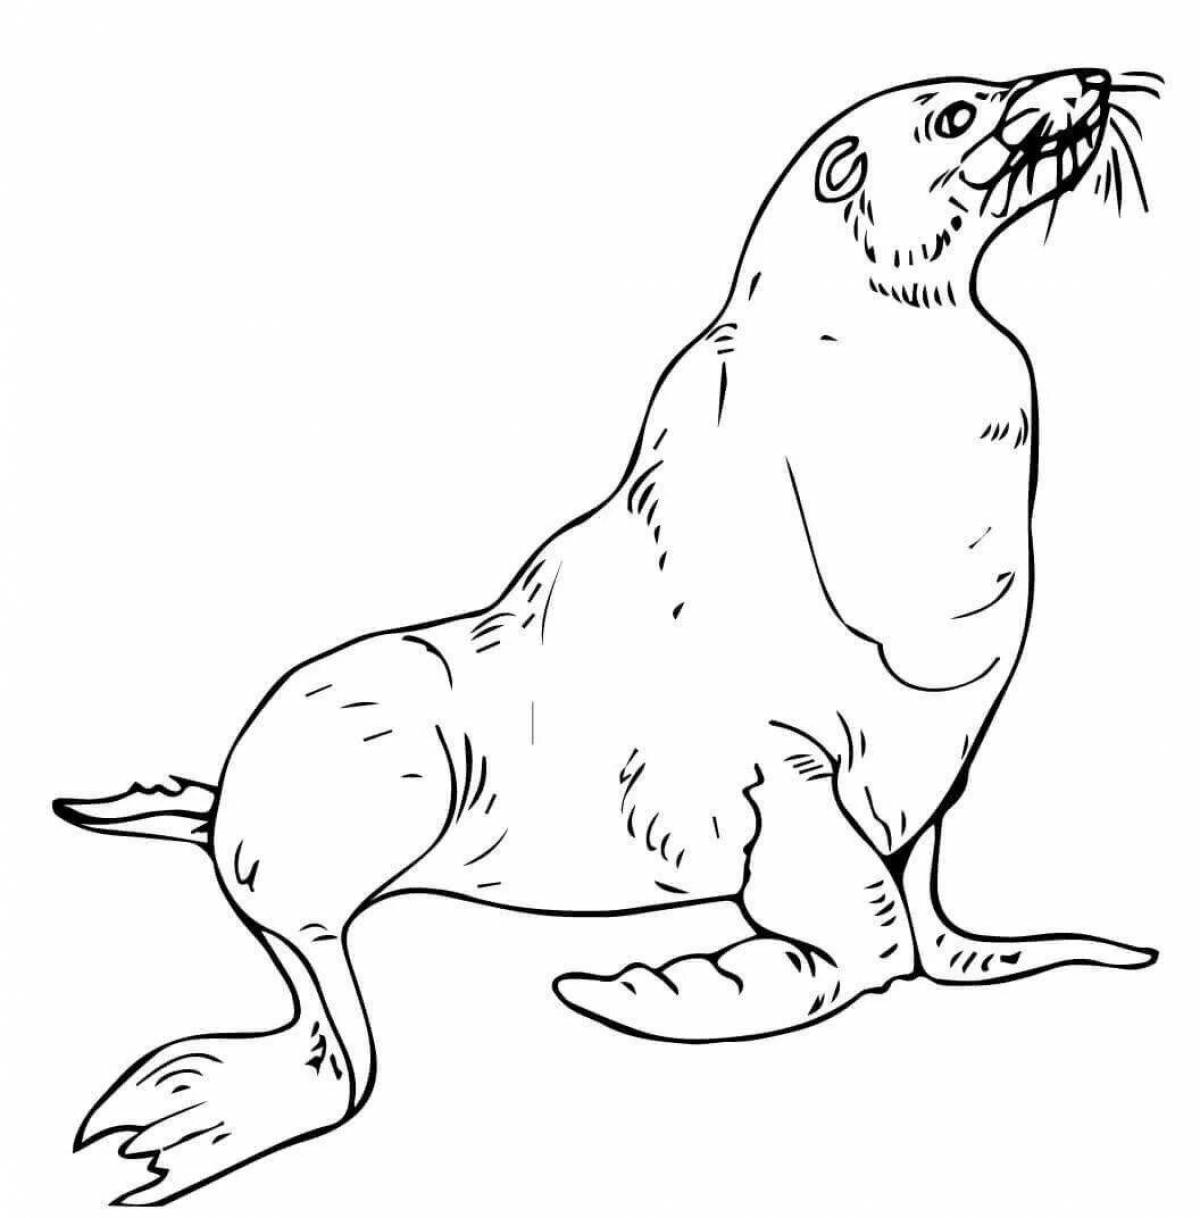 Adorable fur seal coloring book for kids